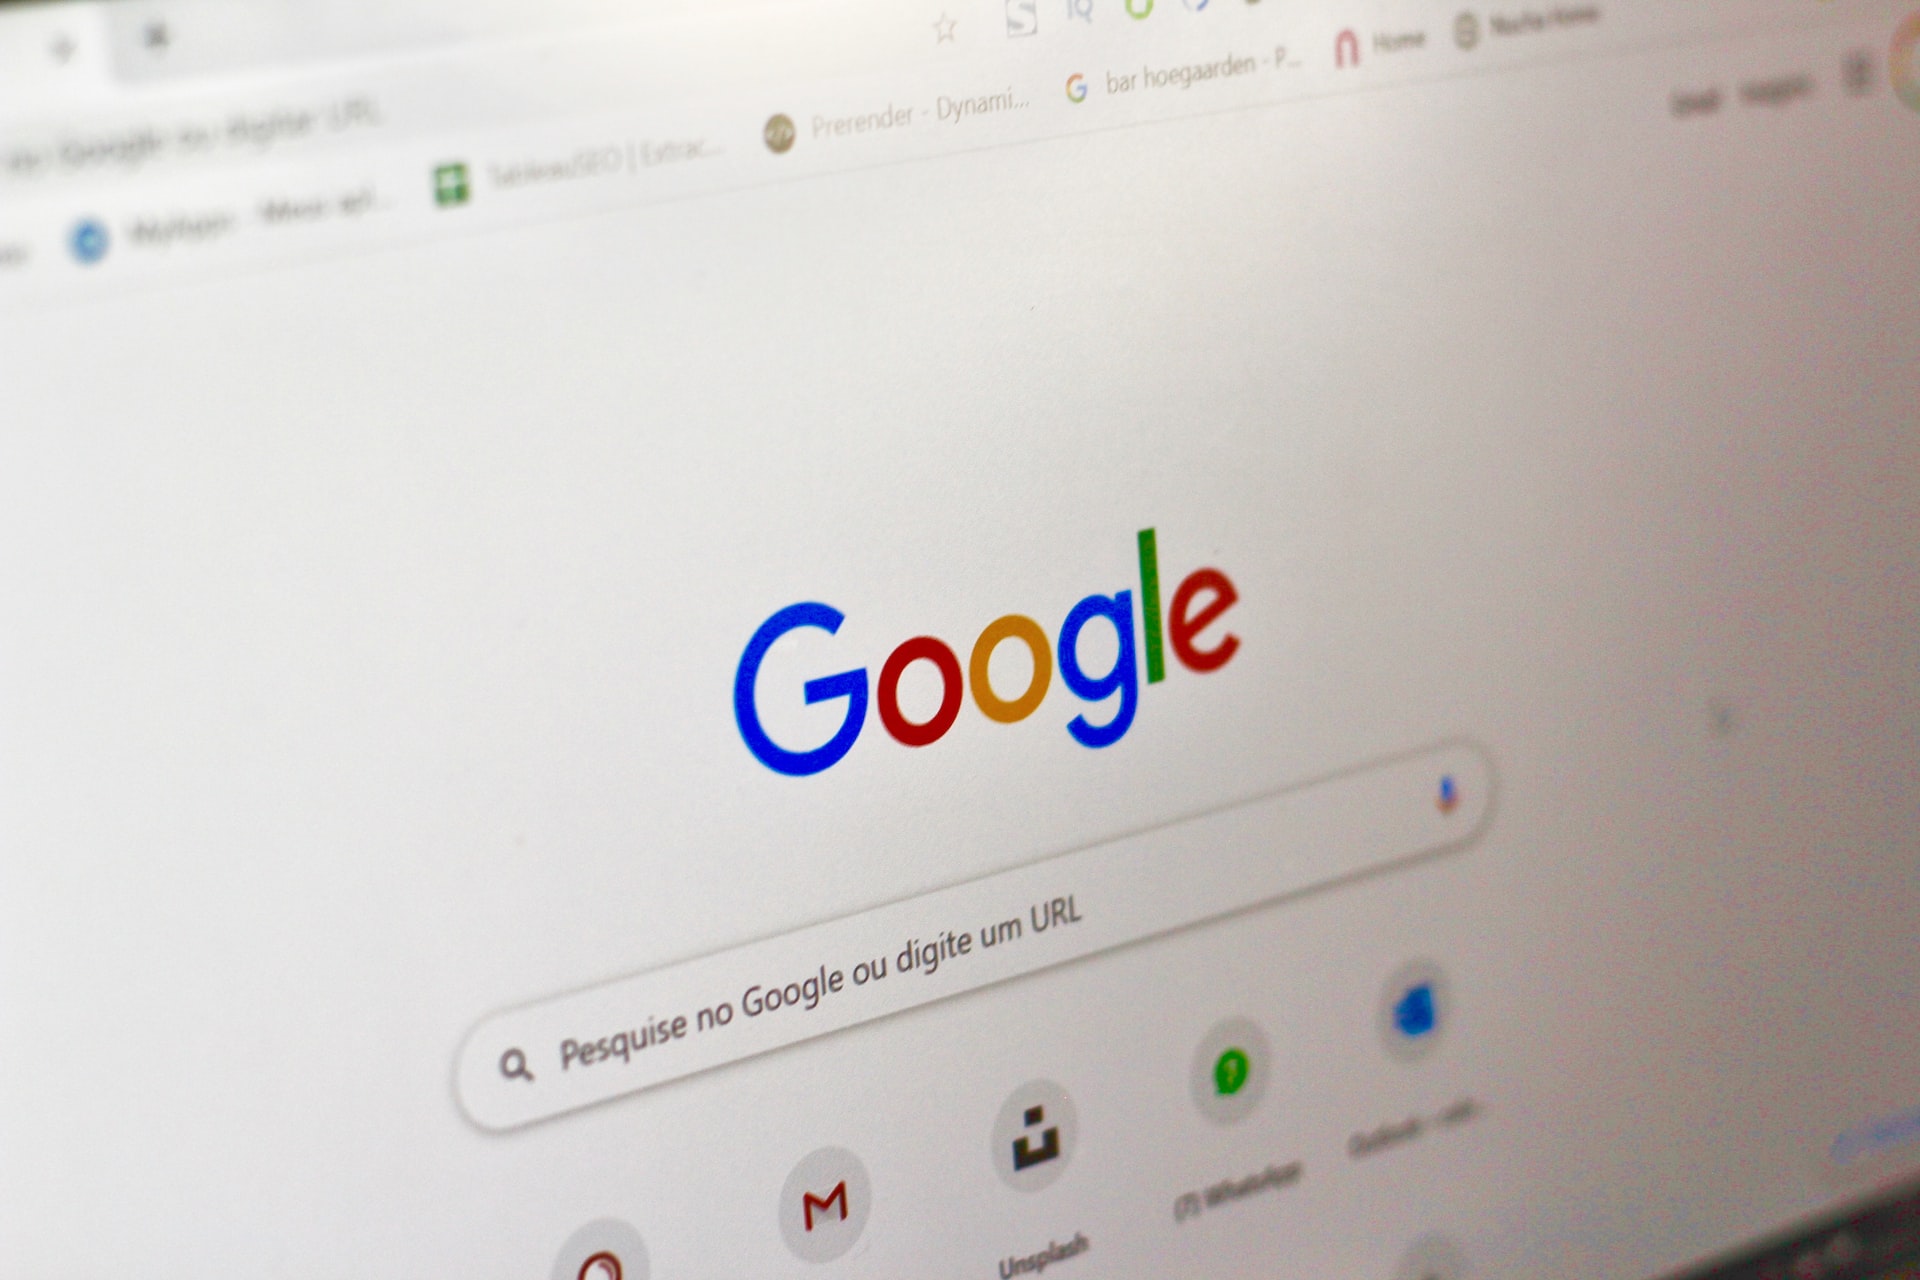 Google is the most used search engine in the world